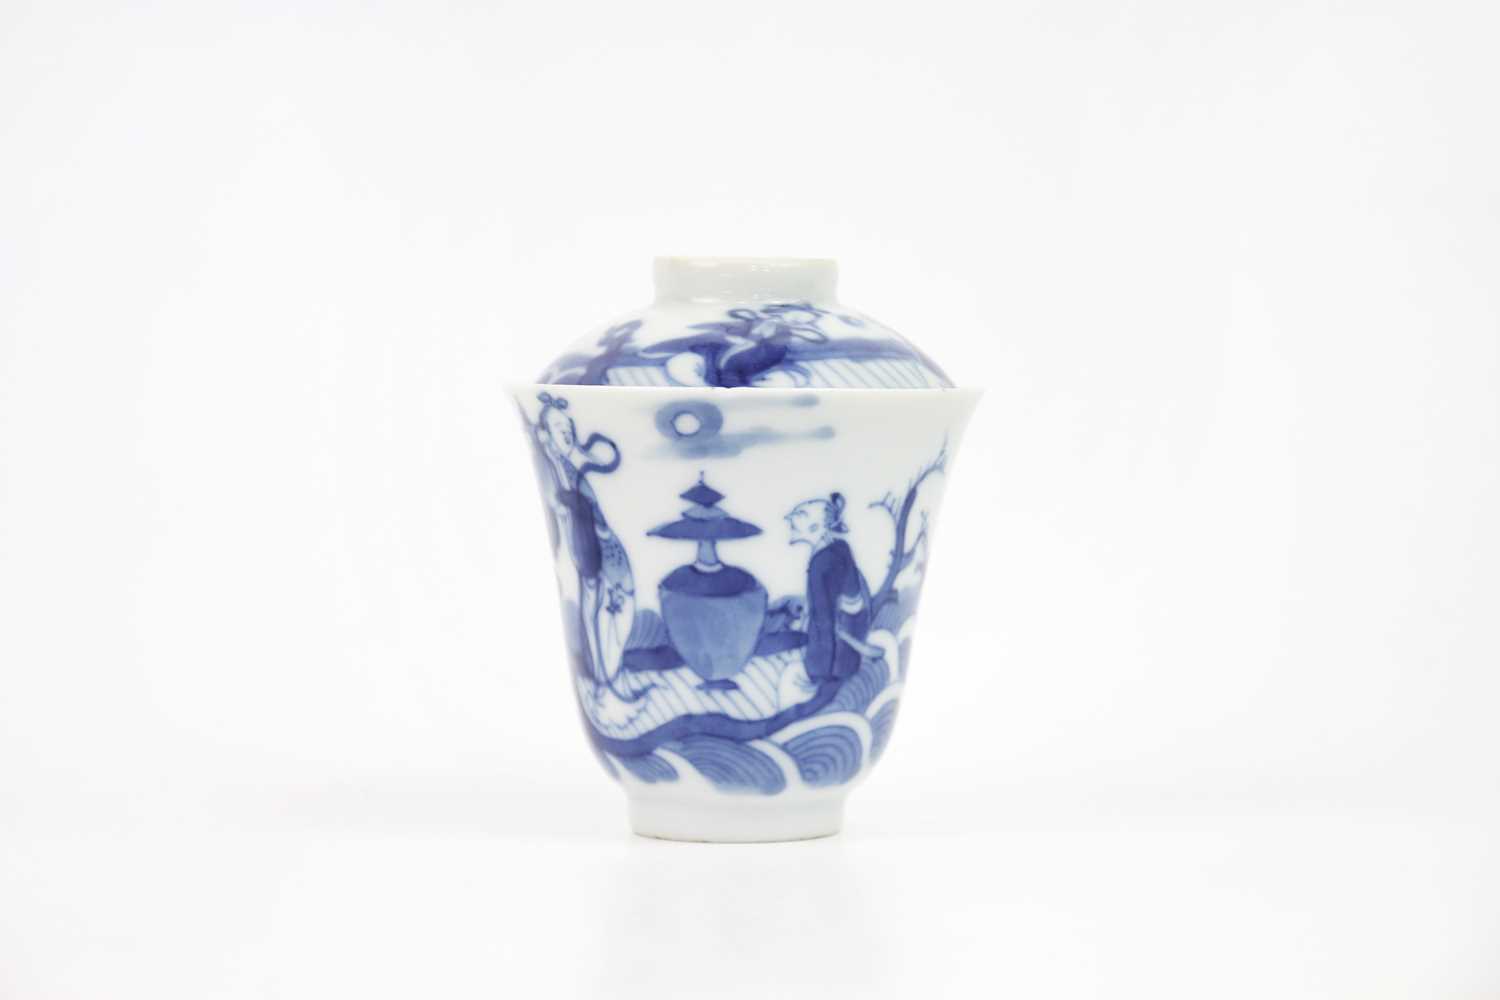 A set of Chinese blue and white porcelain cups, covers and stands, 18th century. - Image 5 of 41